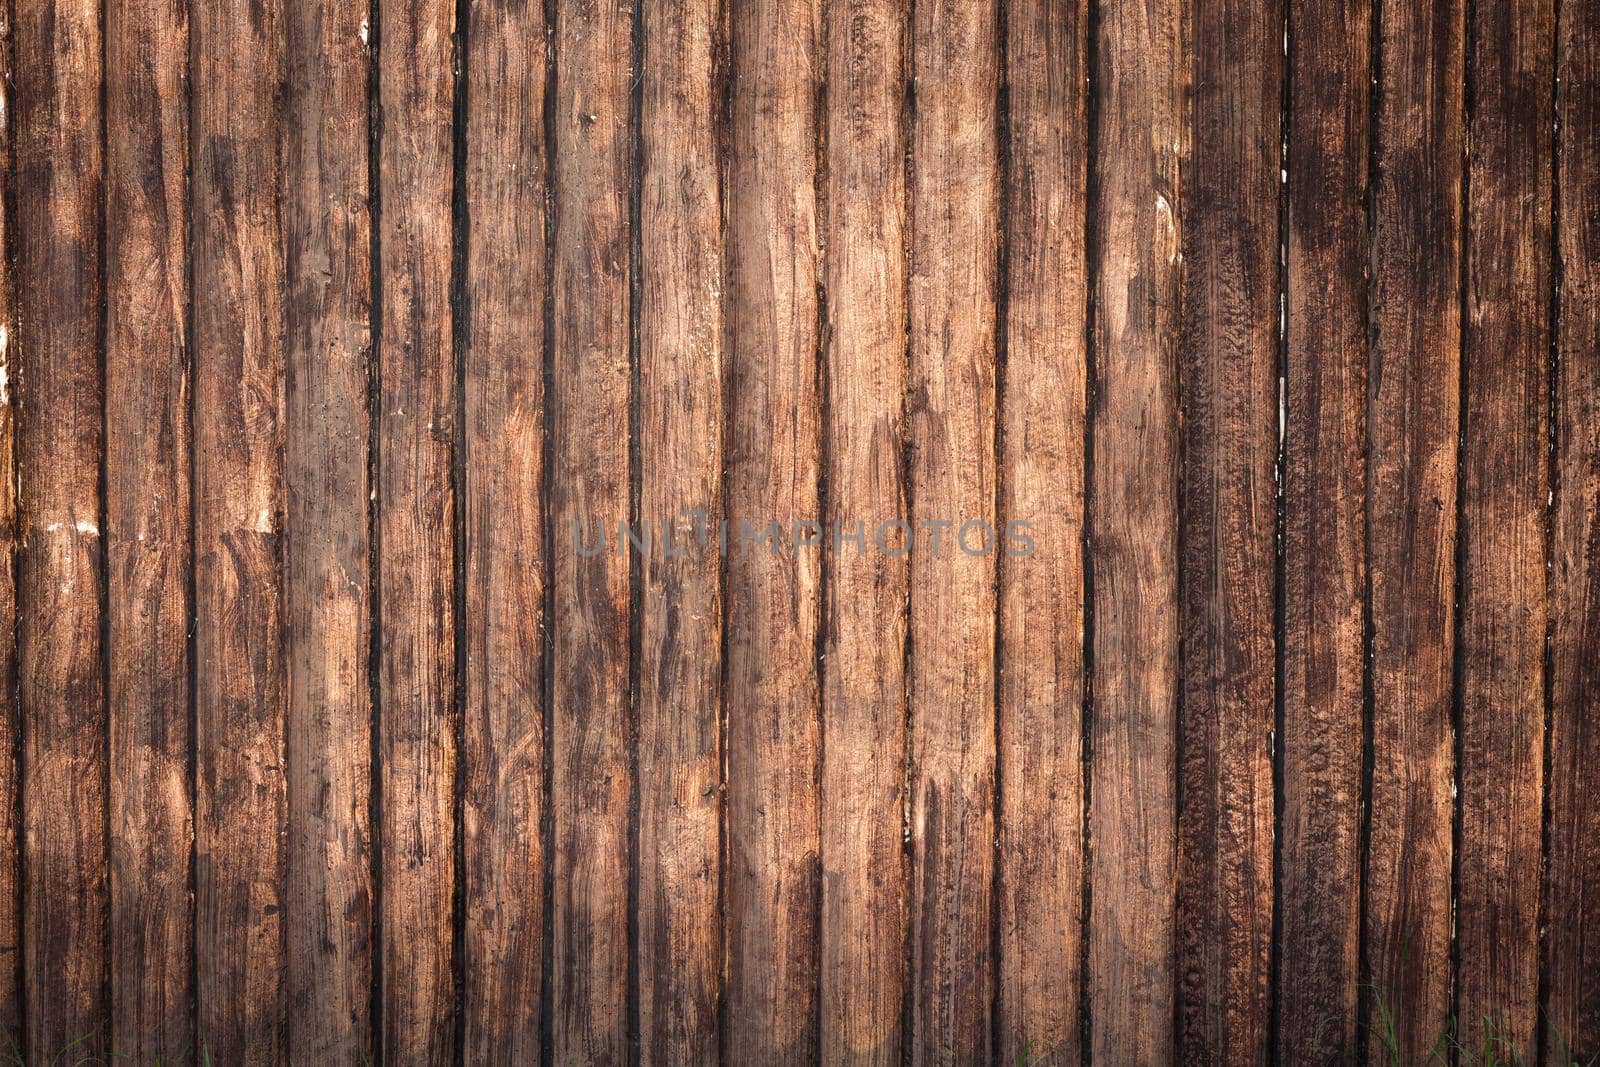 Brown wooden wall on background texture.